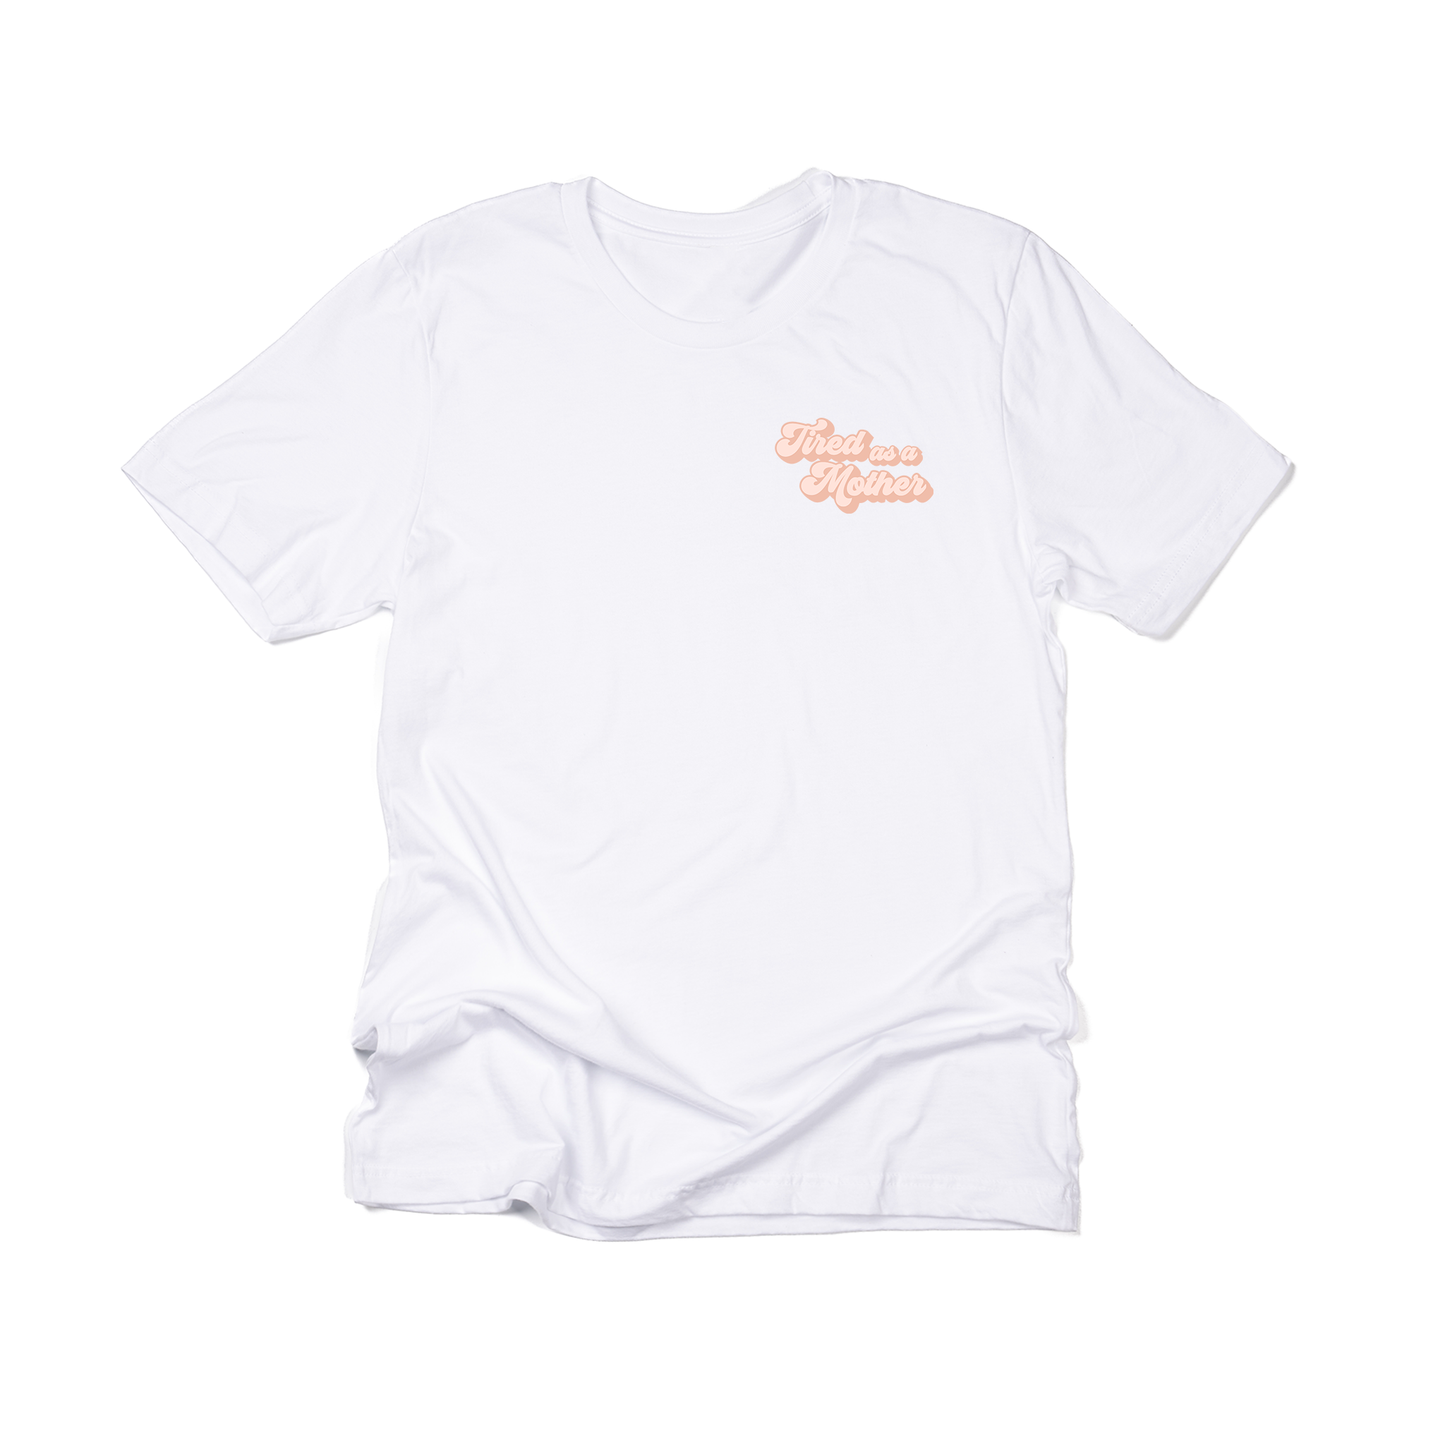 Tired as a Mother (Pocket) - Tee (White)